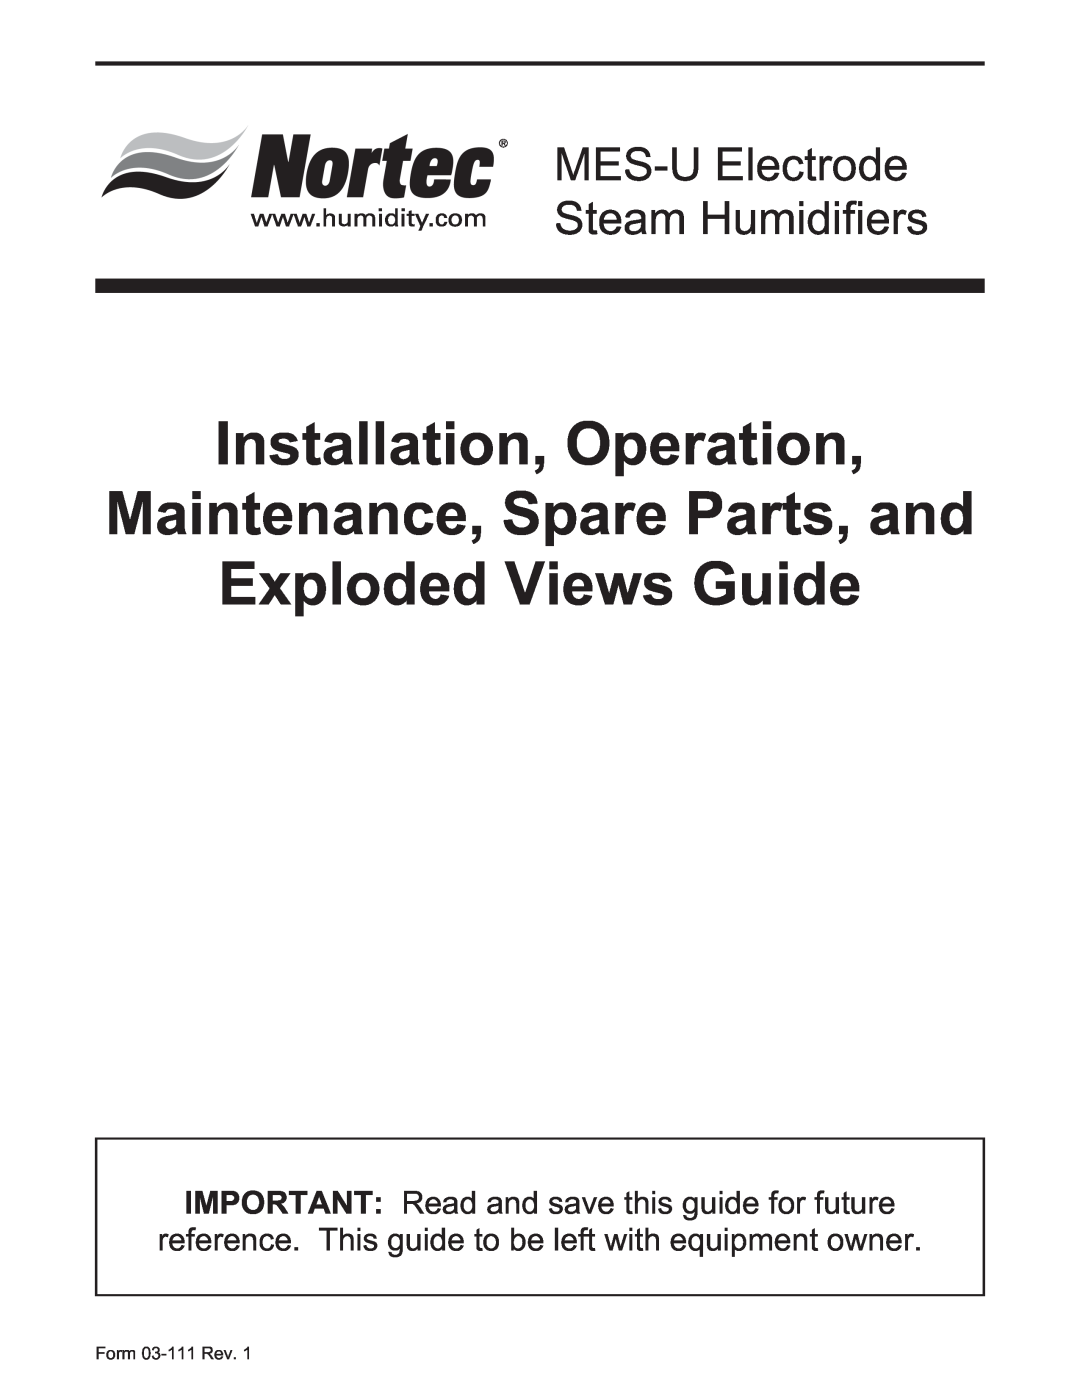 Nortec Industries MES-U manual Installation, Operation, Maintenance, Spare Parts, and, Exploded Views Guide 